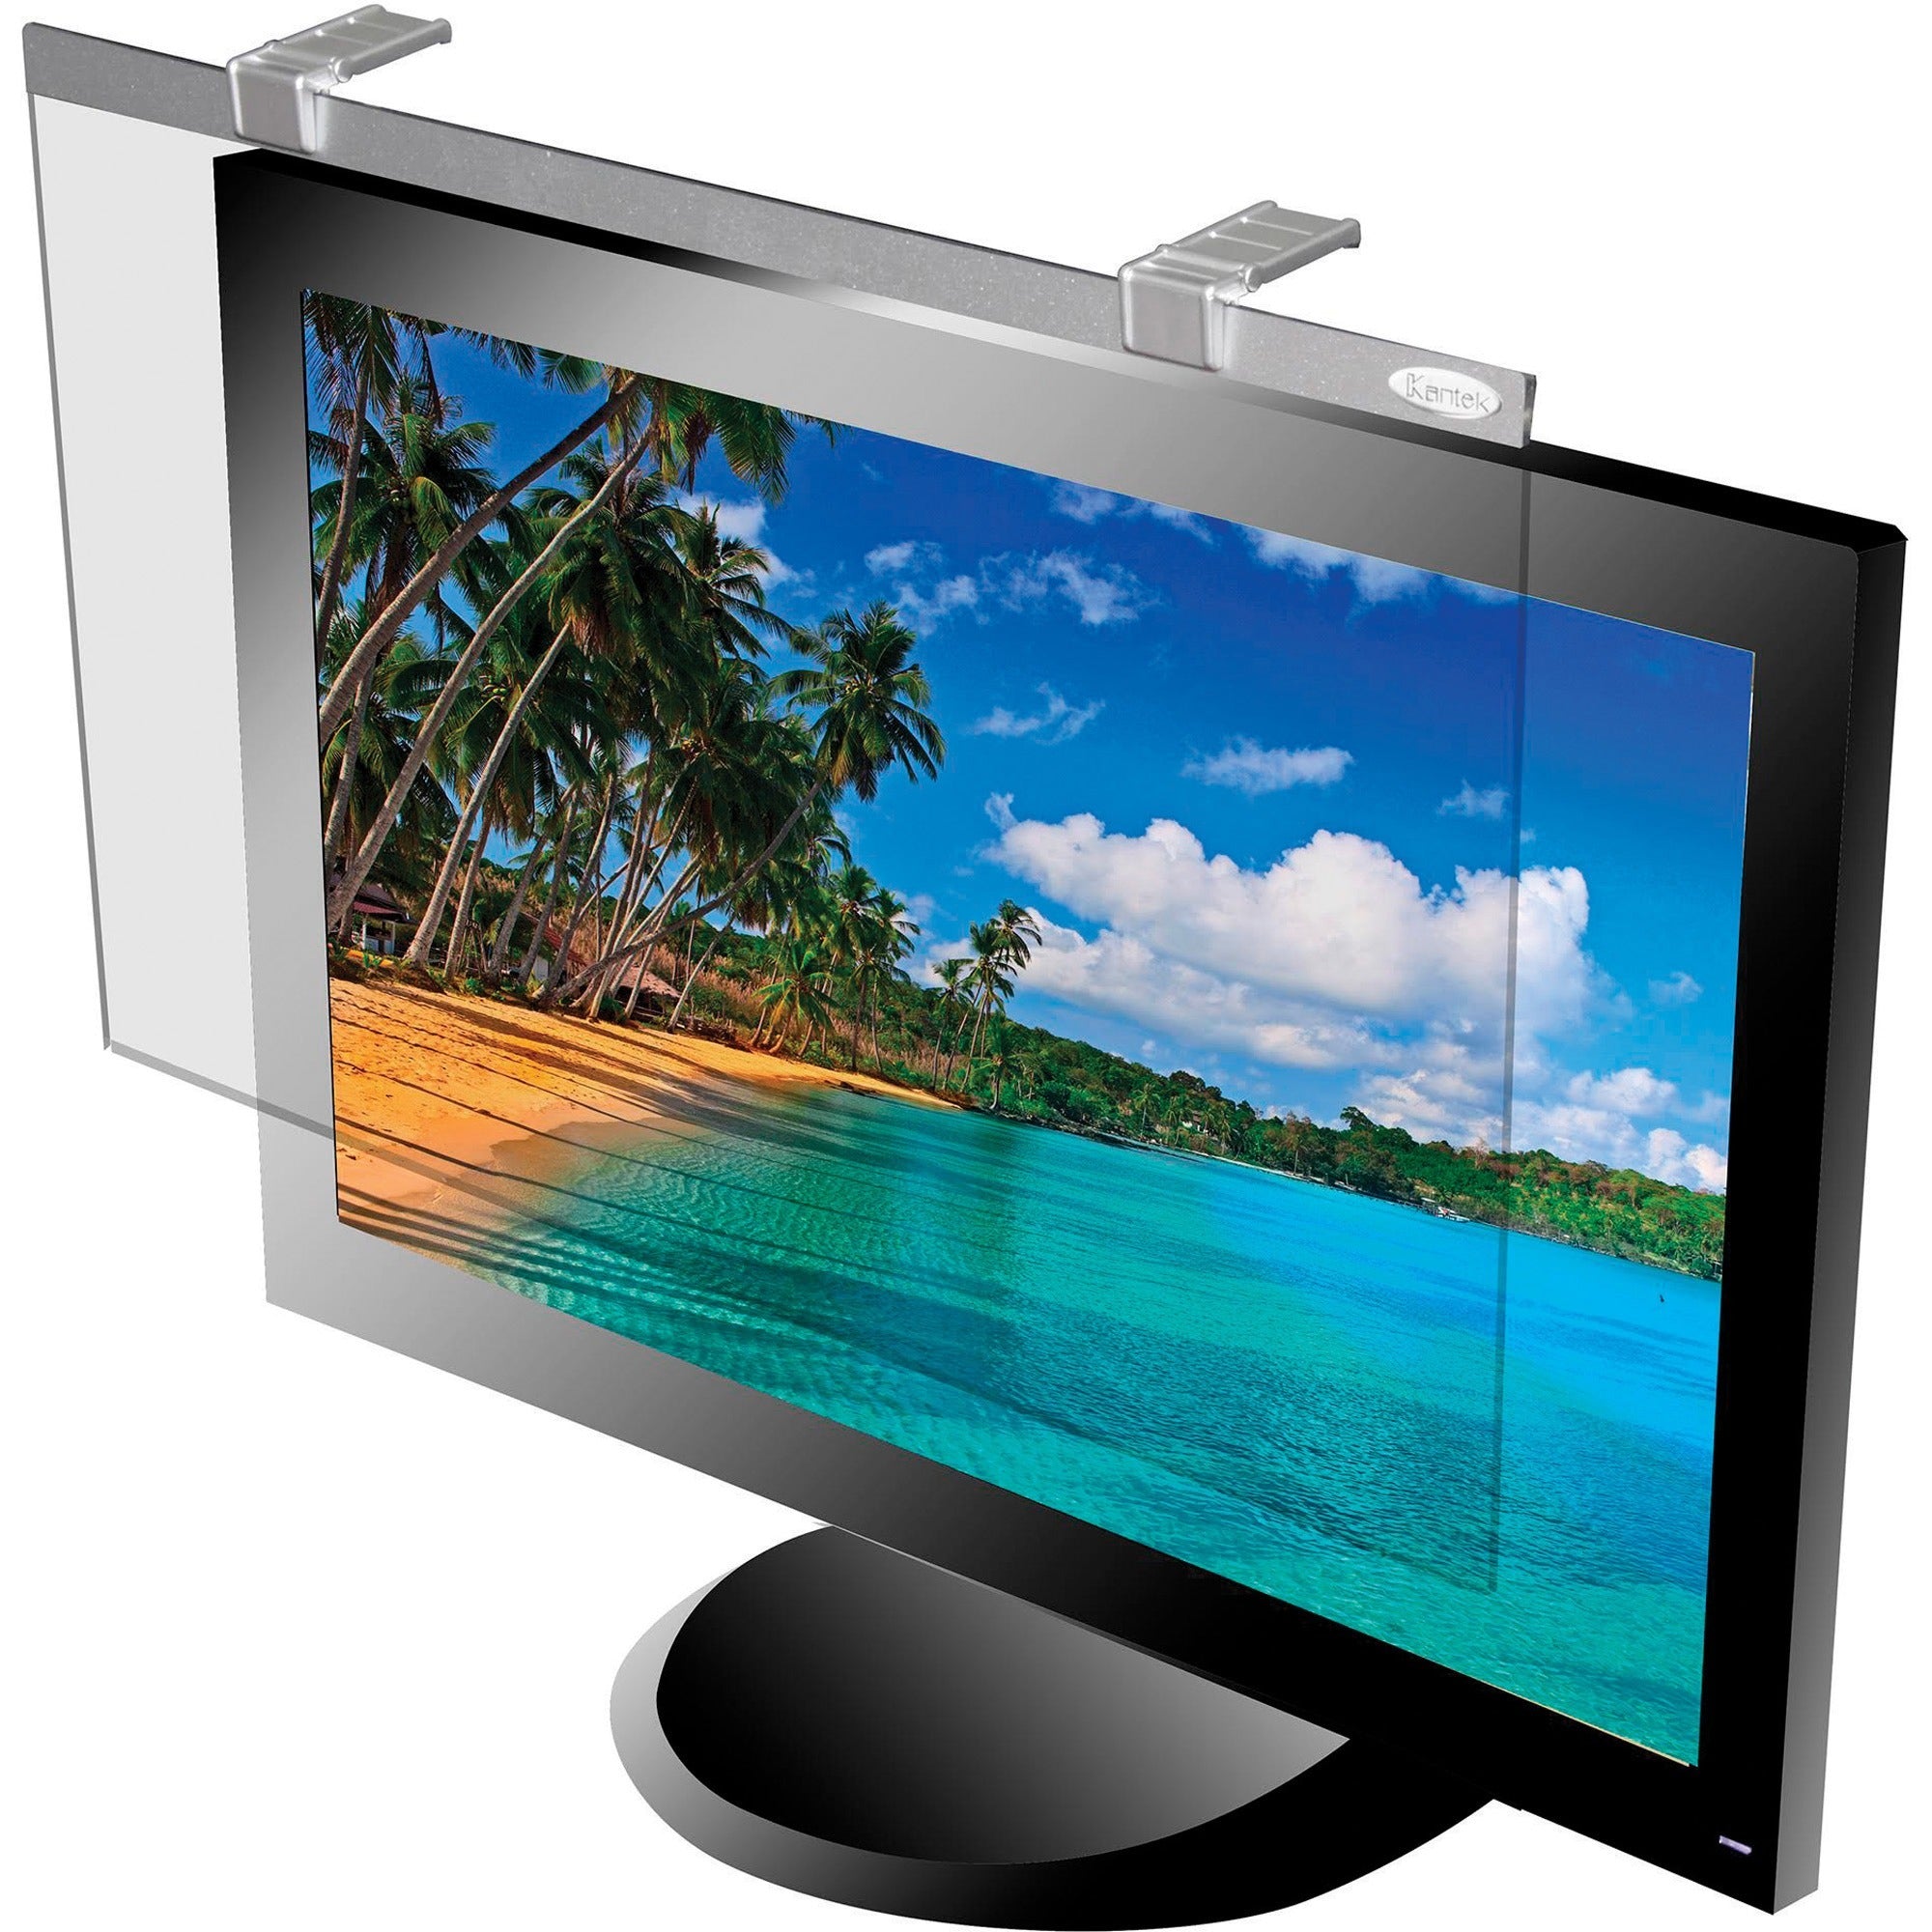 Kantek LCD Protect Anti-glare Filter Fits 17-18in Monitors - For 18"LCD Monitor - Scratch Resistant - Anti-glare - 1 Pack - 1